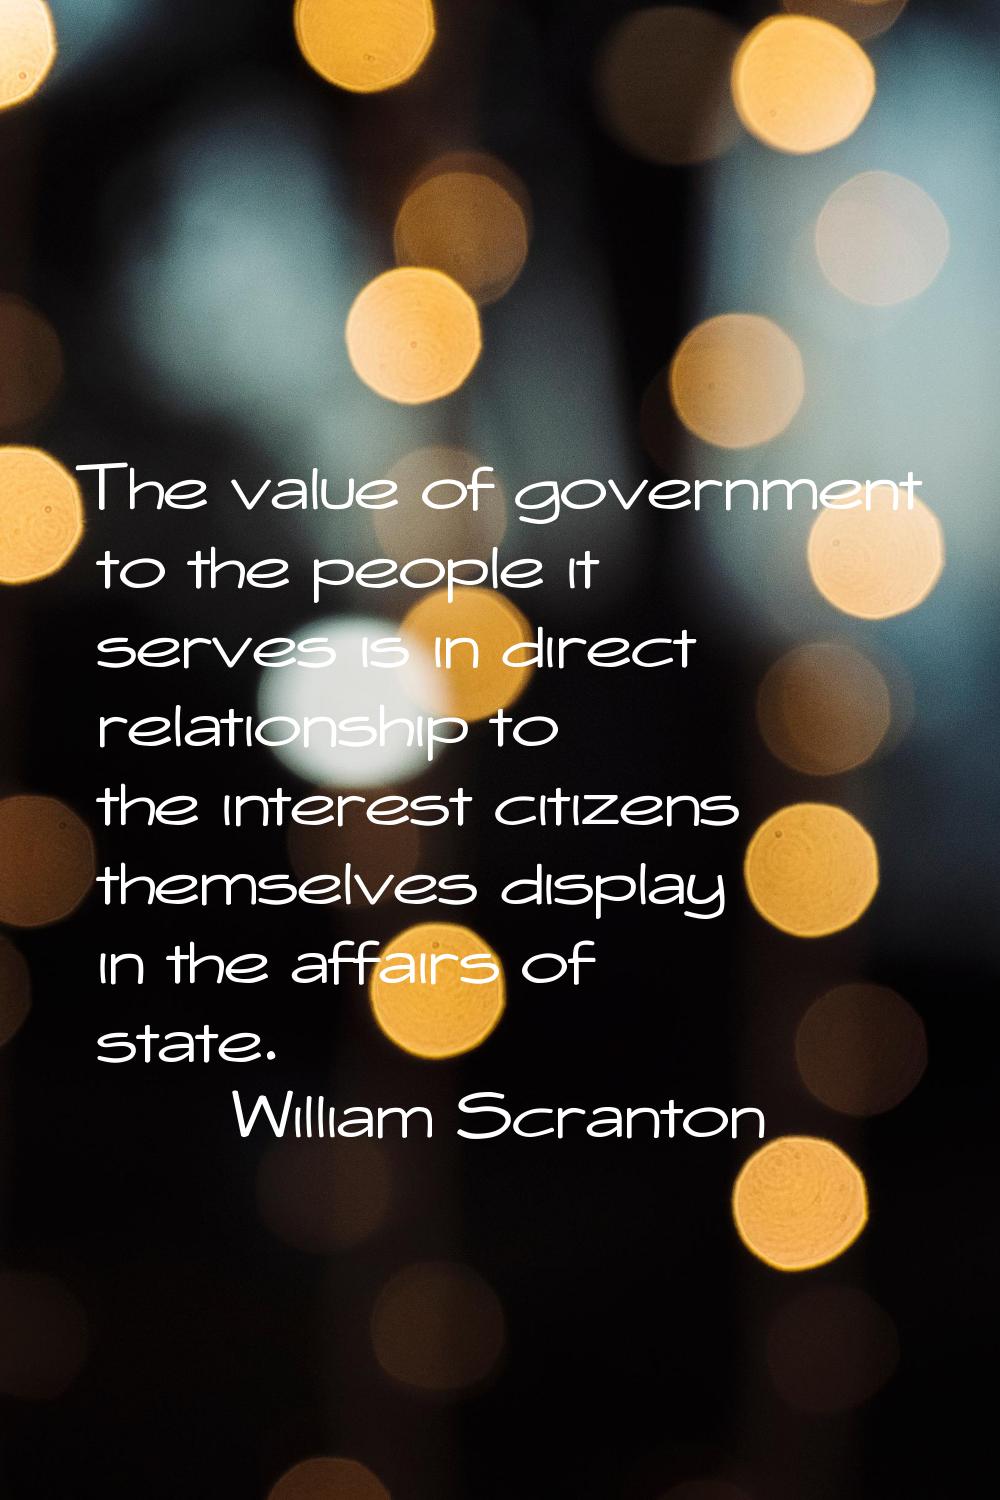 The value of government to the people it serves is in direct relationship to the interest citizens 